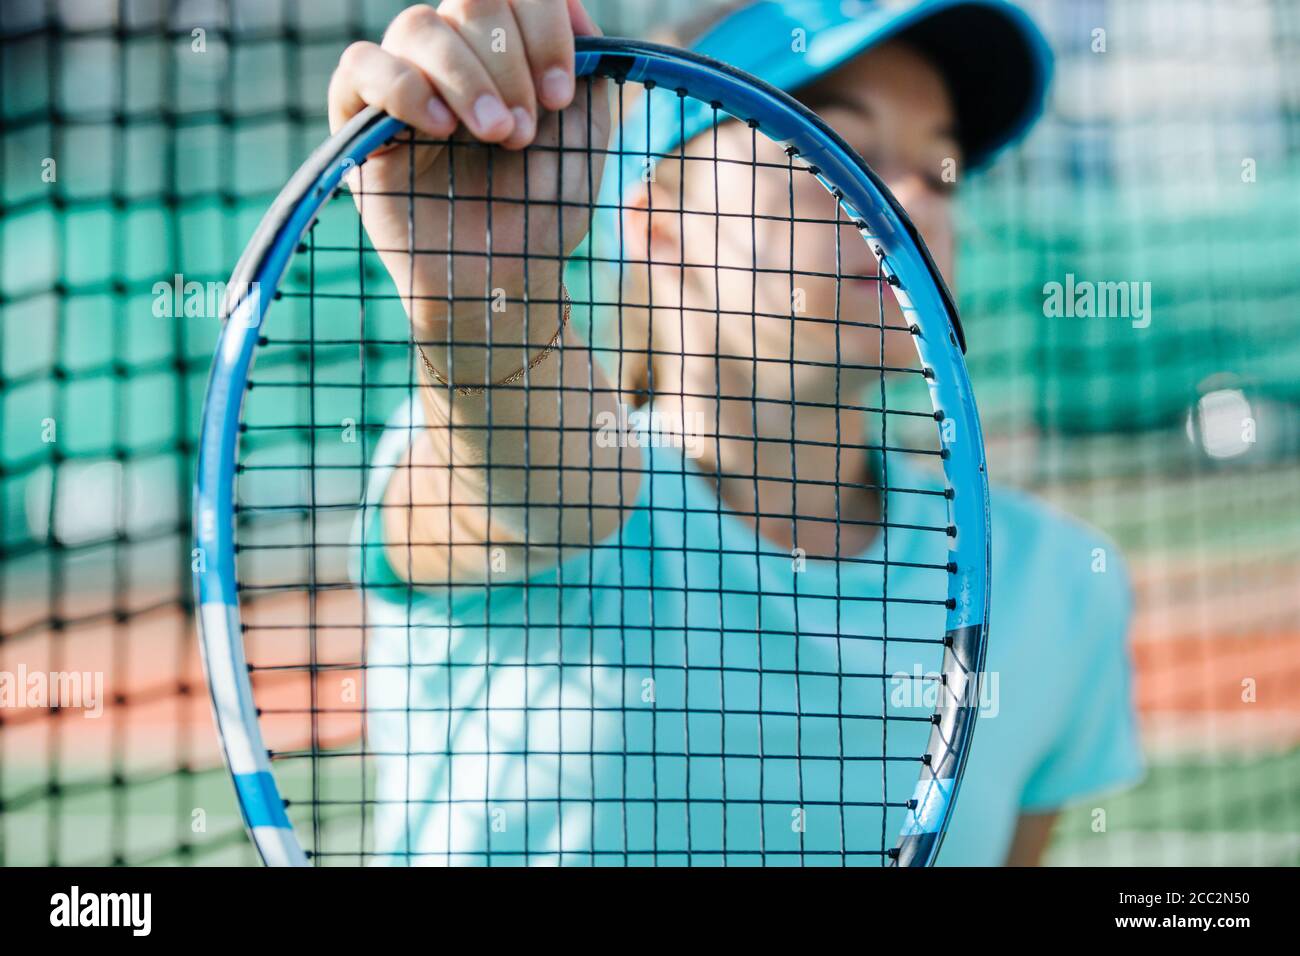 Teenage girl sitting on a tennis court, holding racket net close to camera Stock Photo